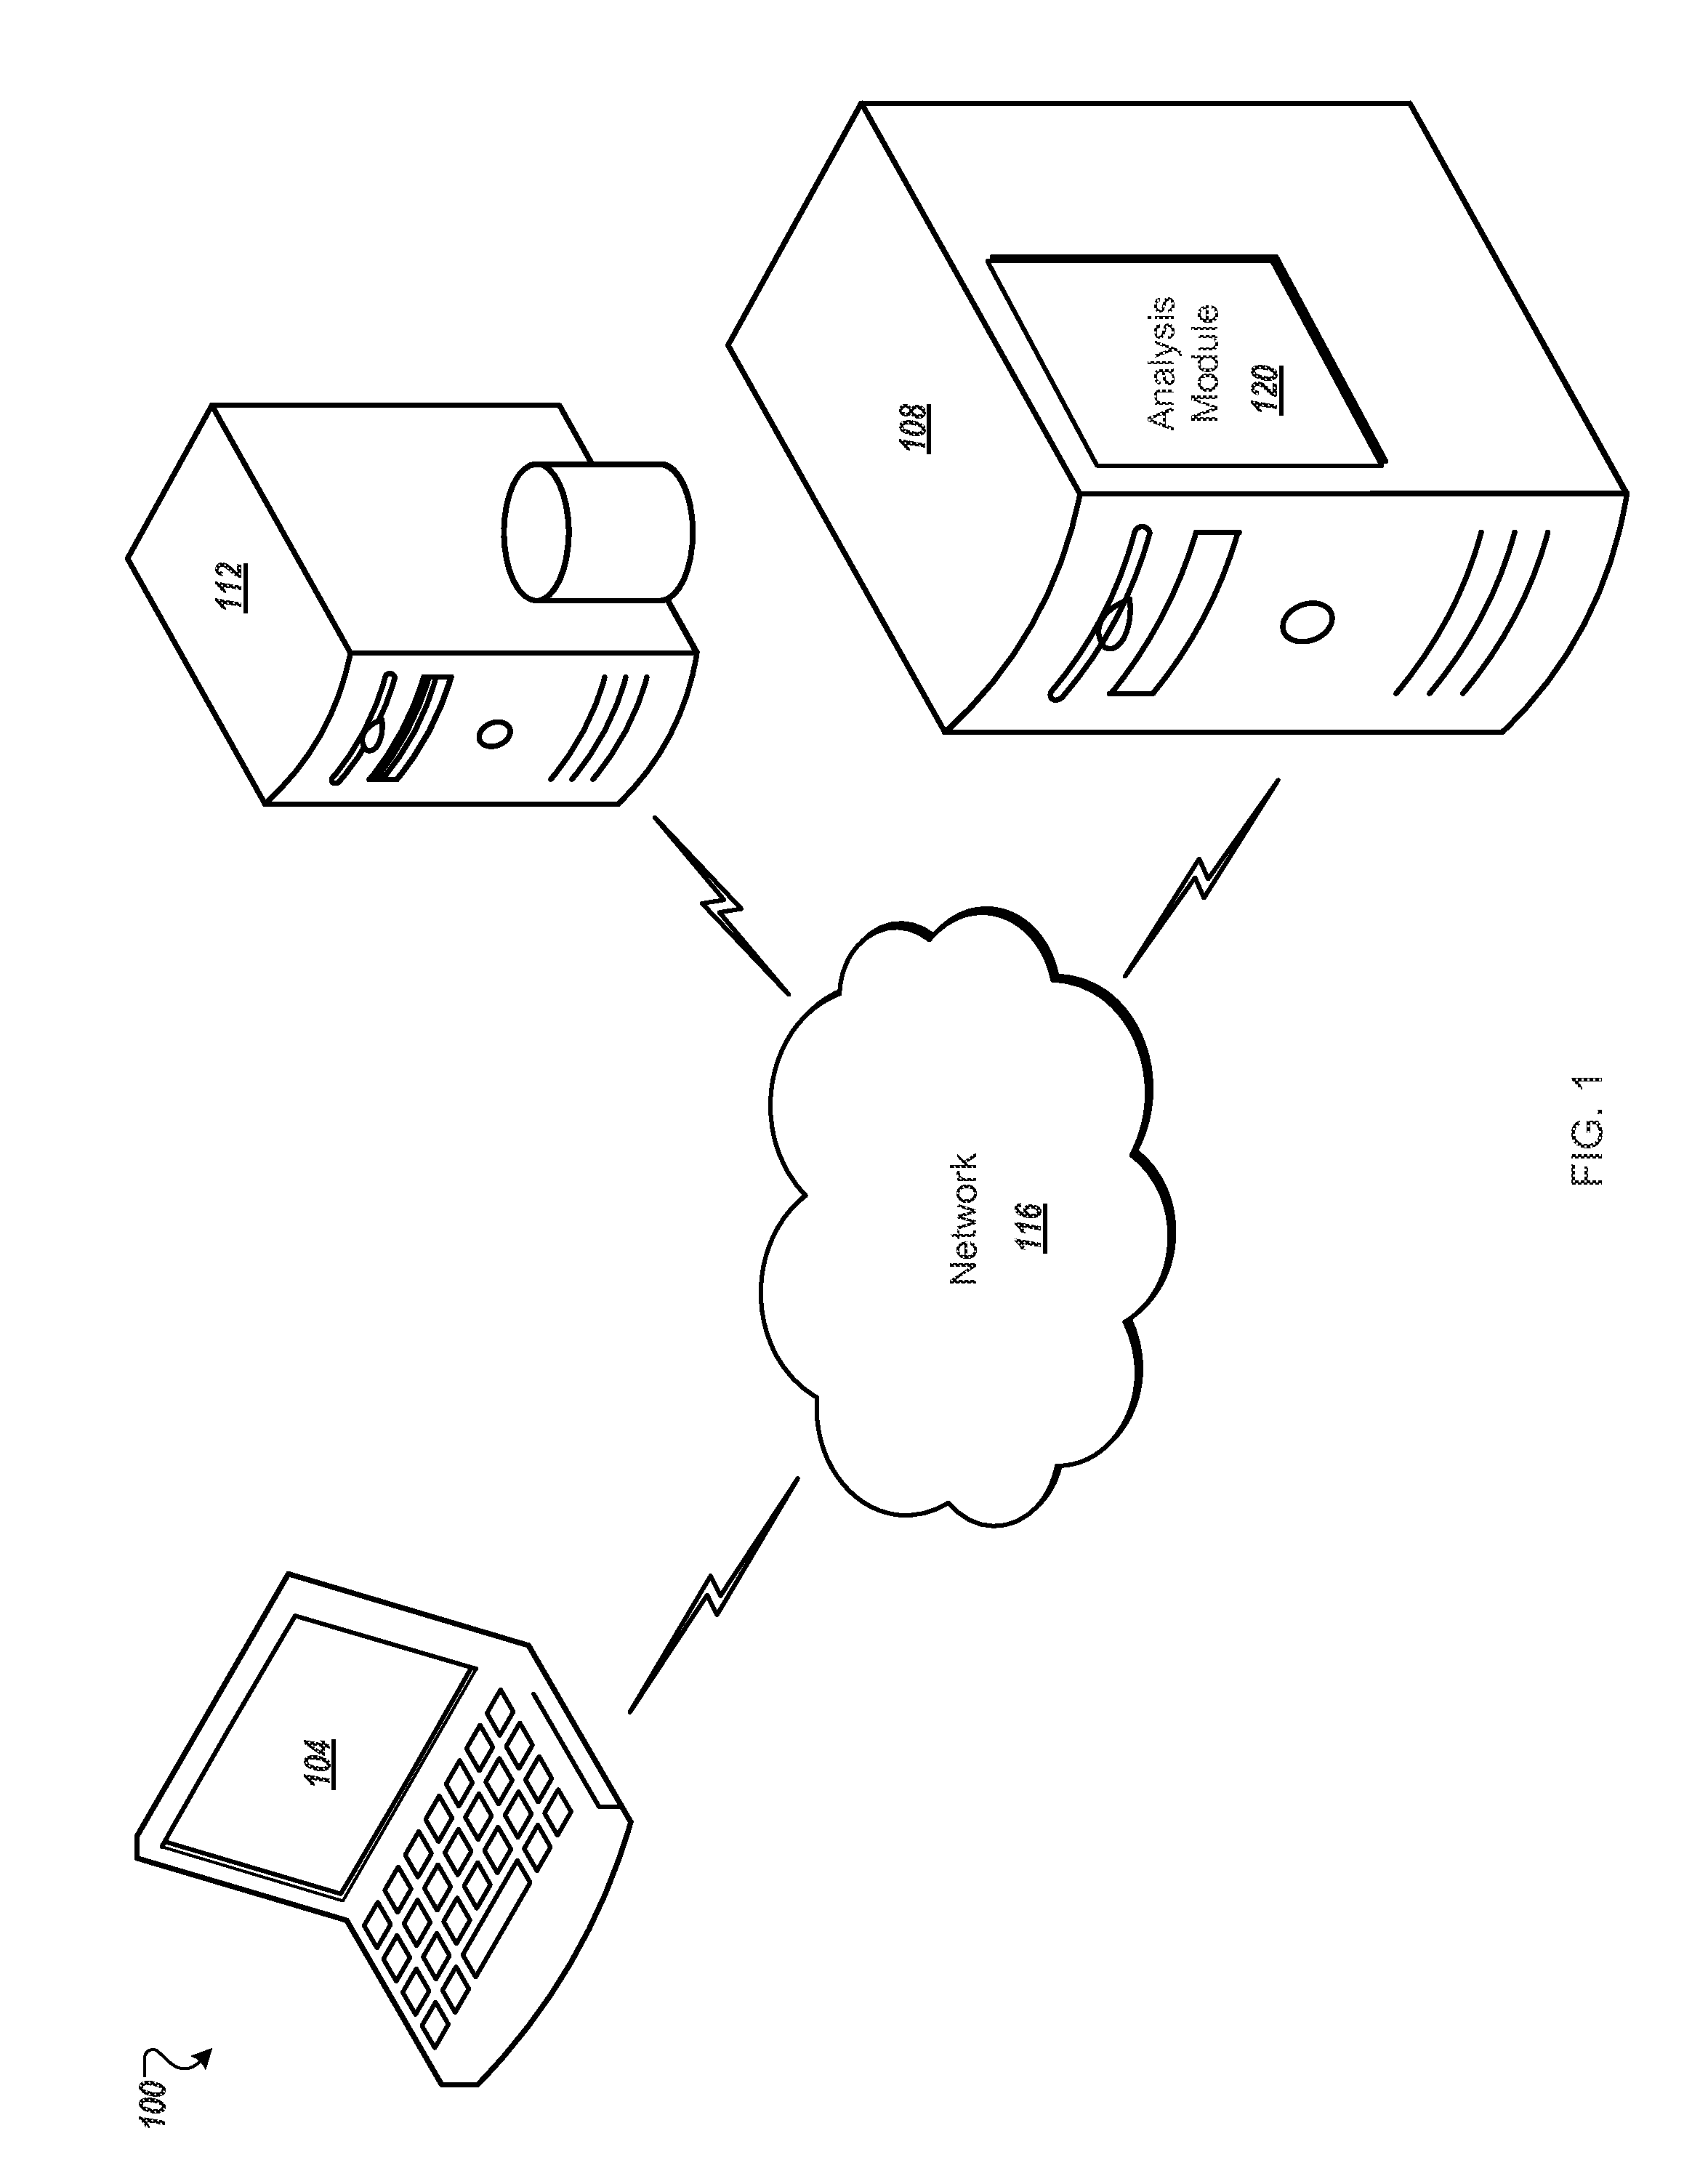 Systems and methods for detection of chromosomal gains and losses